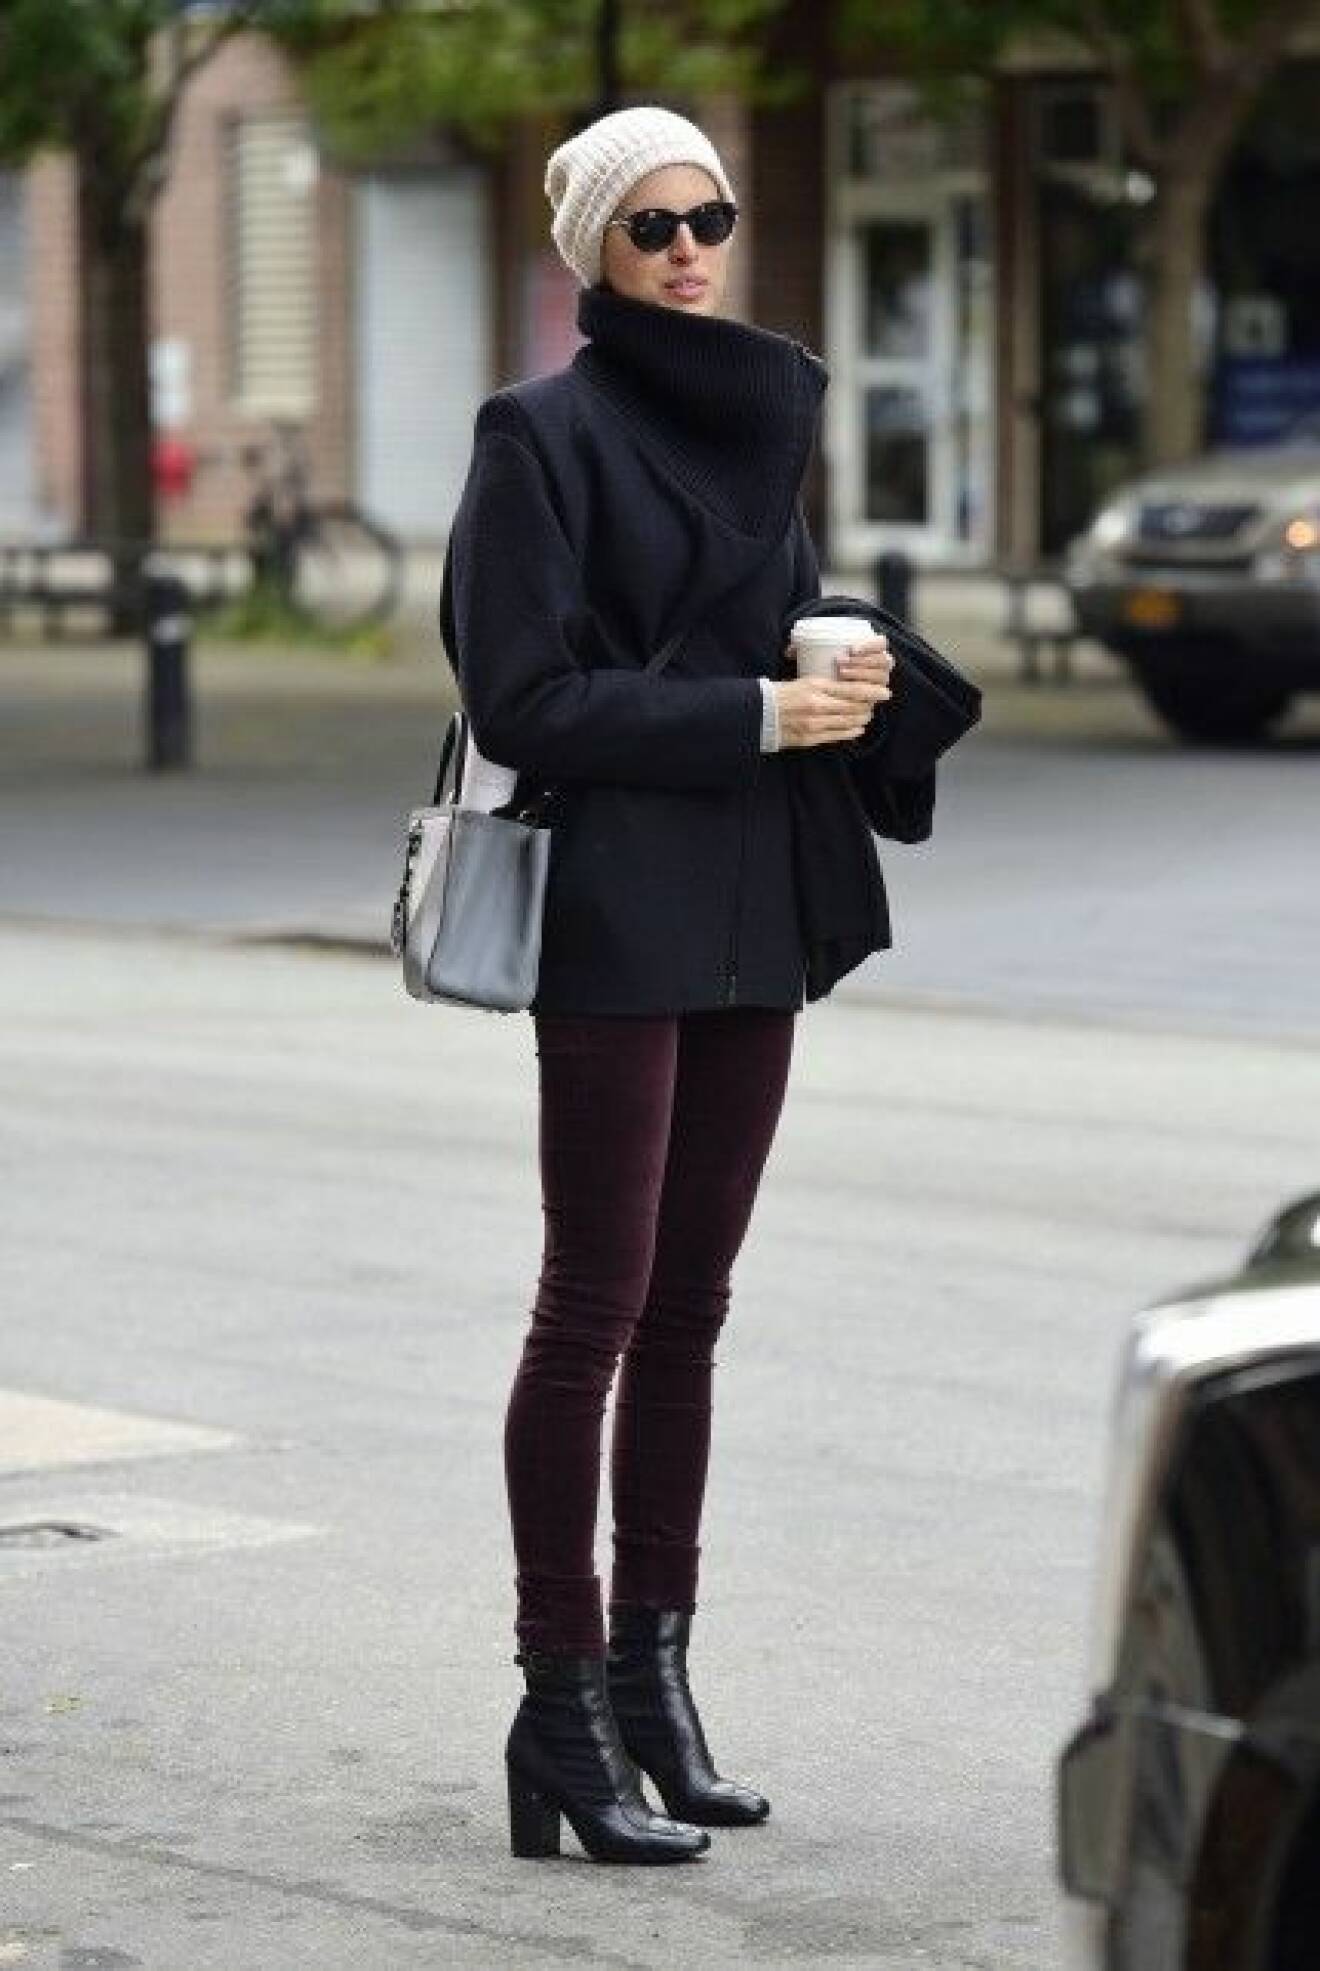 Karolina Kurkova texts and holds her coffee while waiting for a cab in Tribeca in NYC